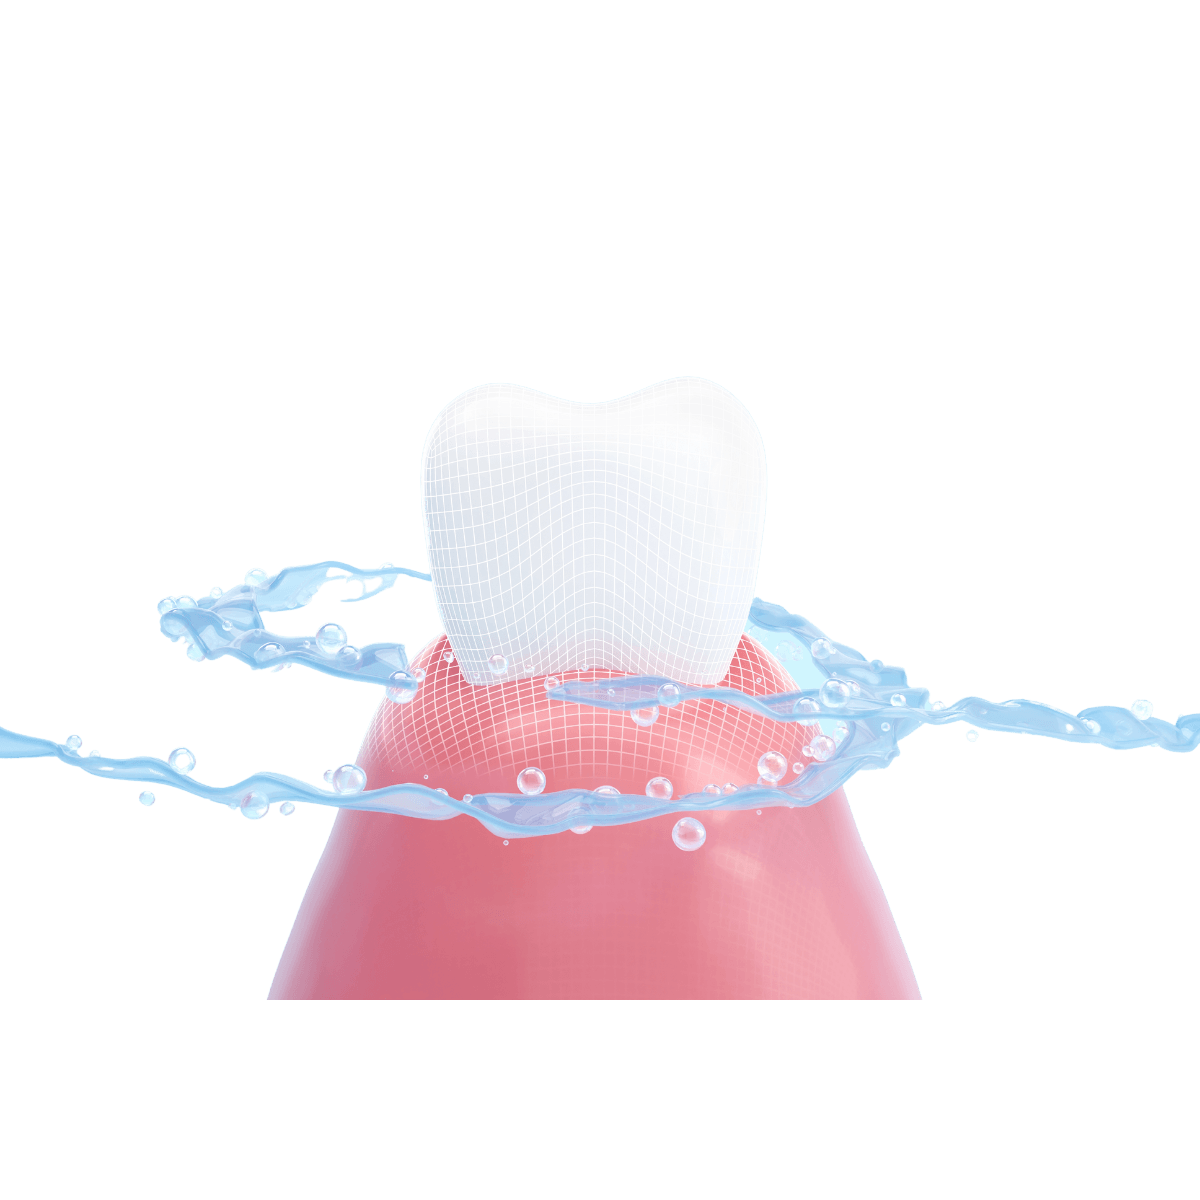 Tooth being whitened image